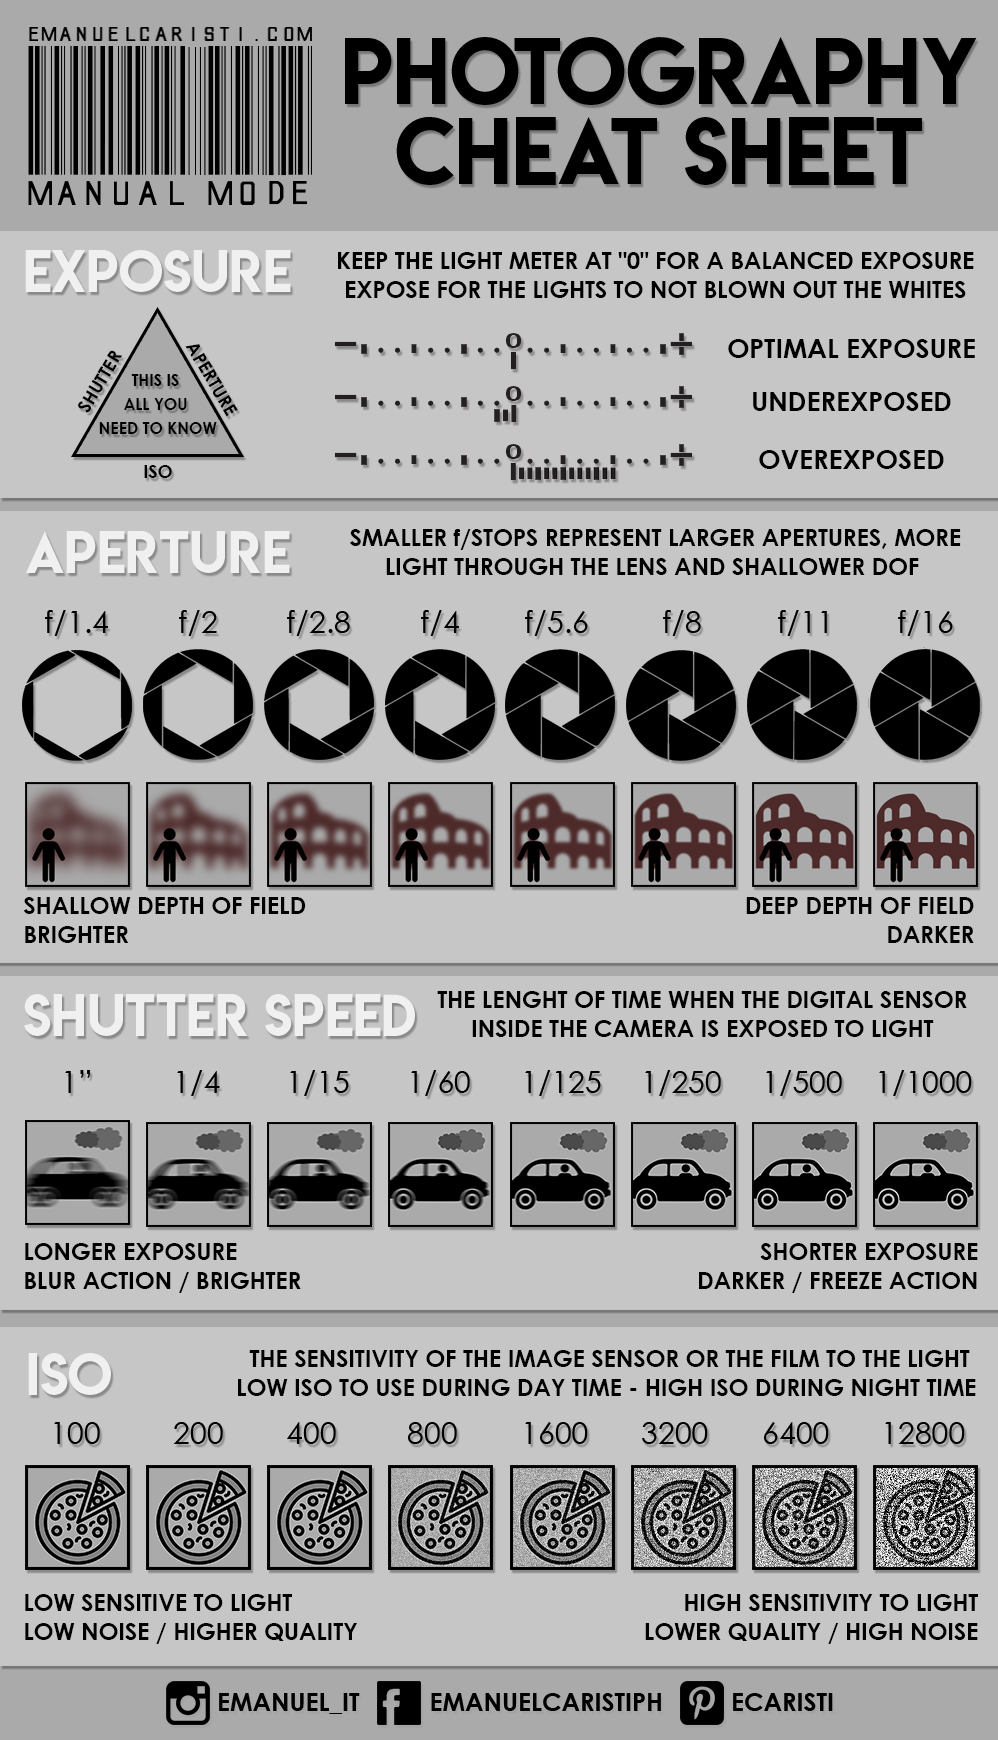 Photography Cheat Sheet with all the info about how to shoot in manual mode with your DSLR or Mirrorless